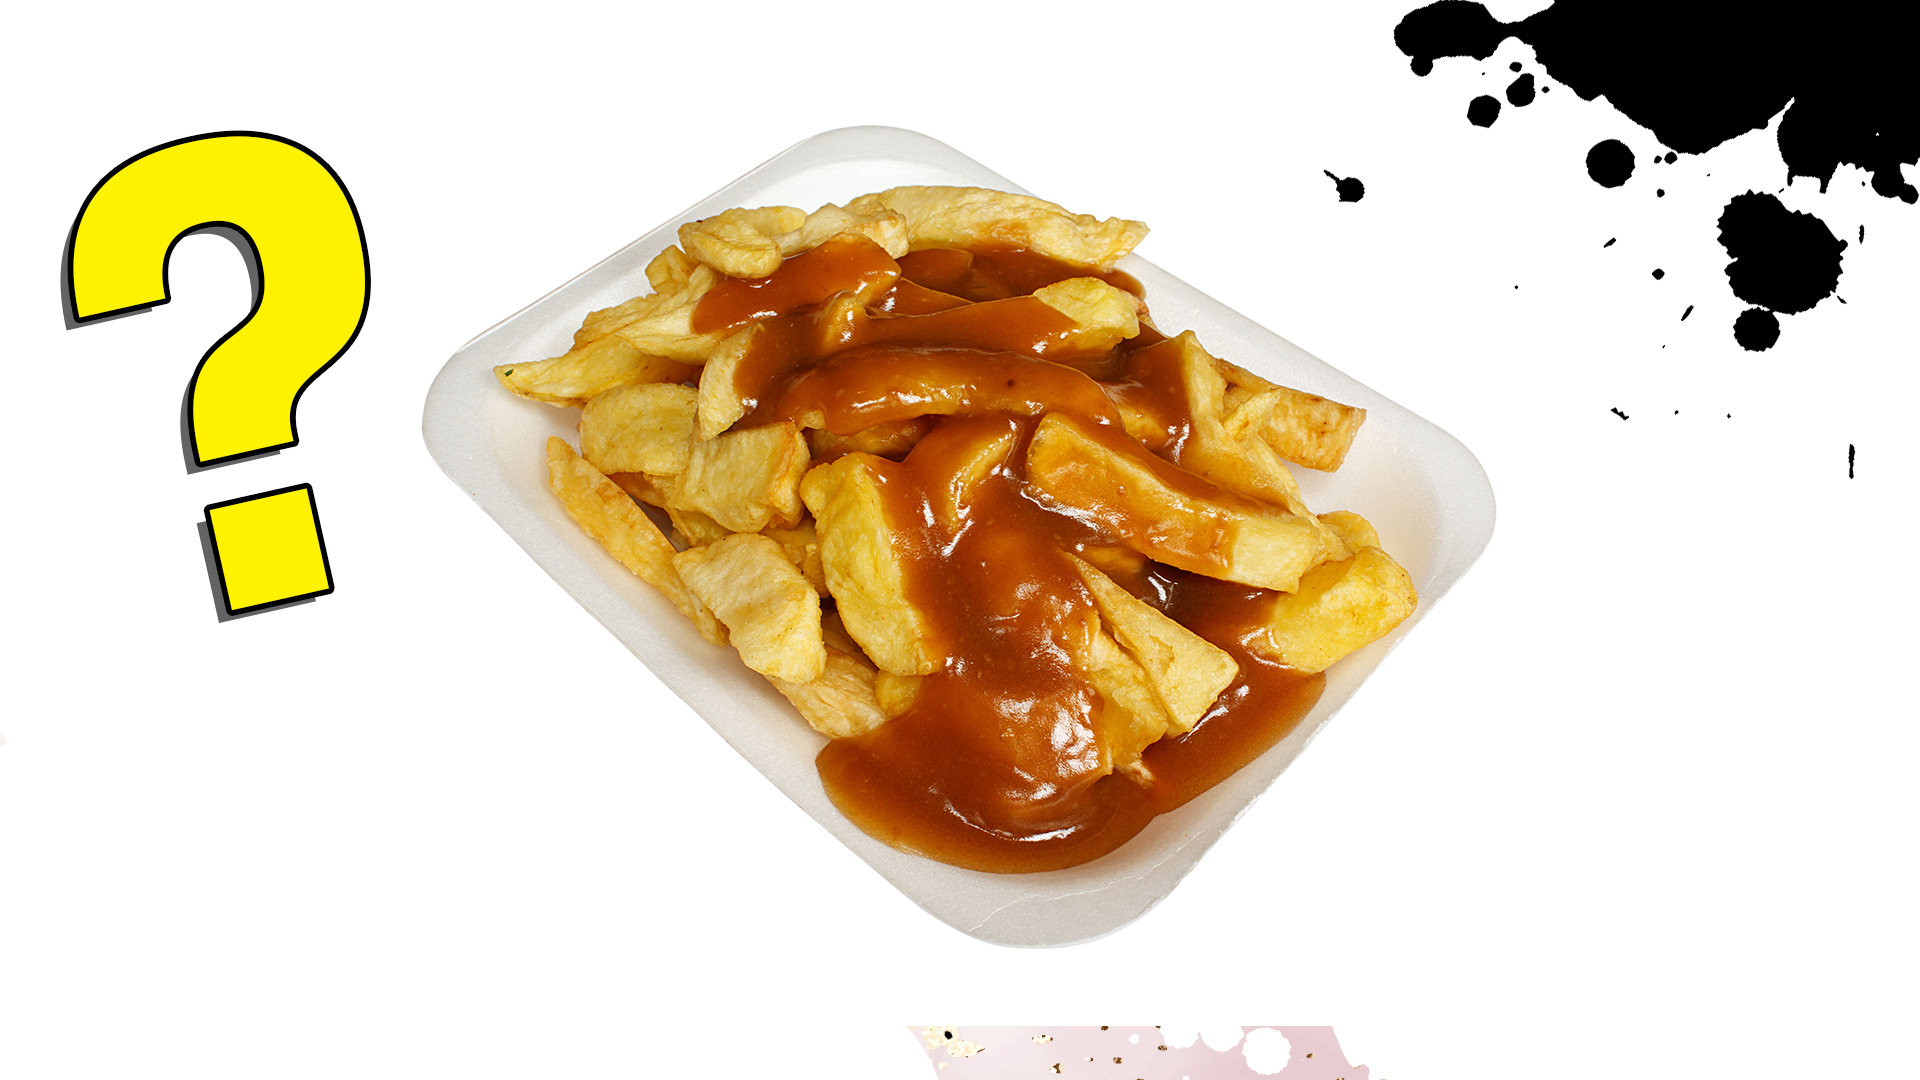 Chips and curry sauce